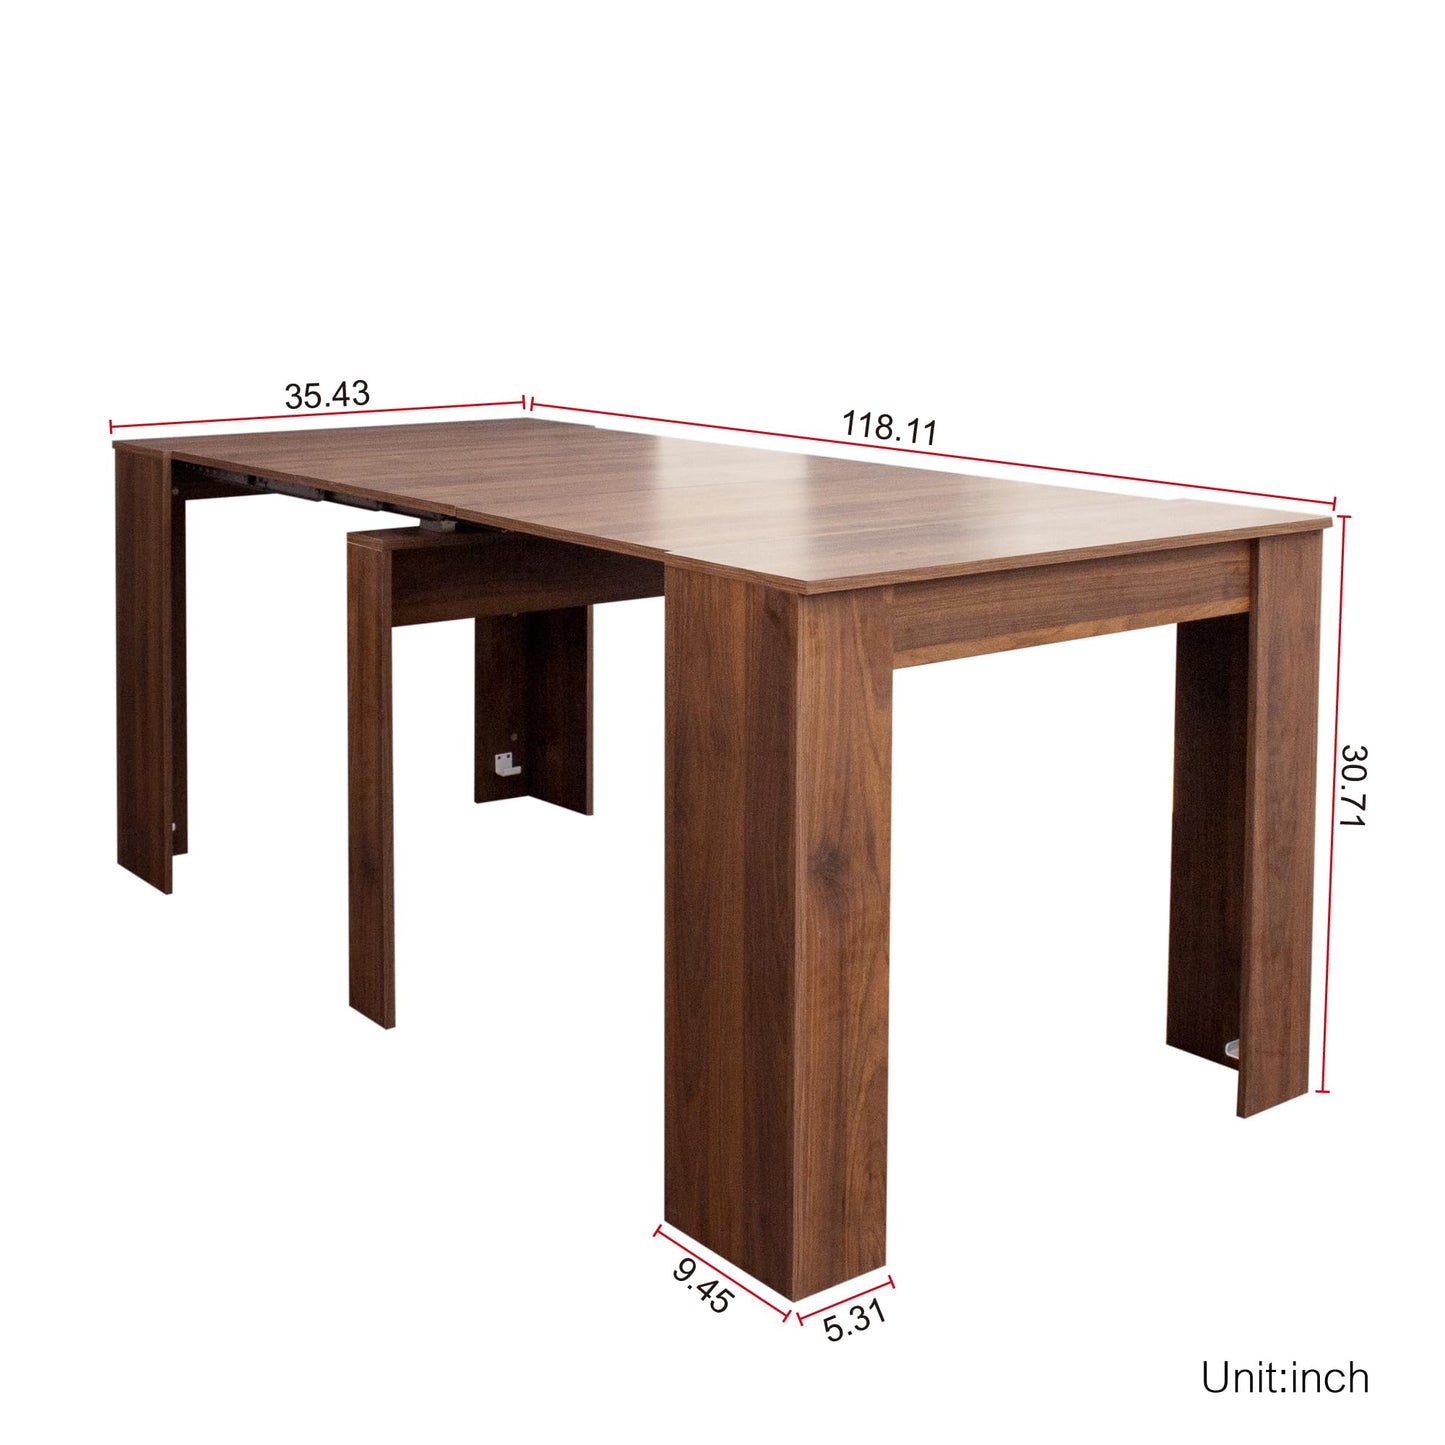 SSLine Rectangular Extendable Dining Table 35"-118" Super Long Conference Meeting Table for 6 8 10 12 People Rustic Walnut Expandable Kitchen Tables